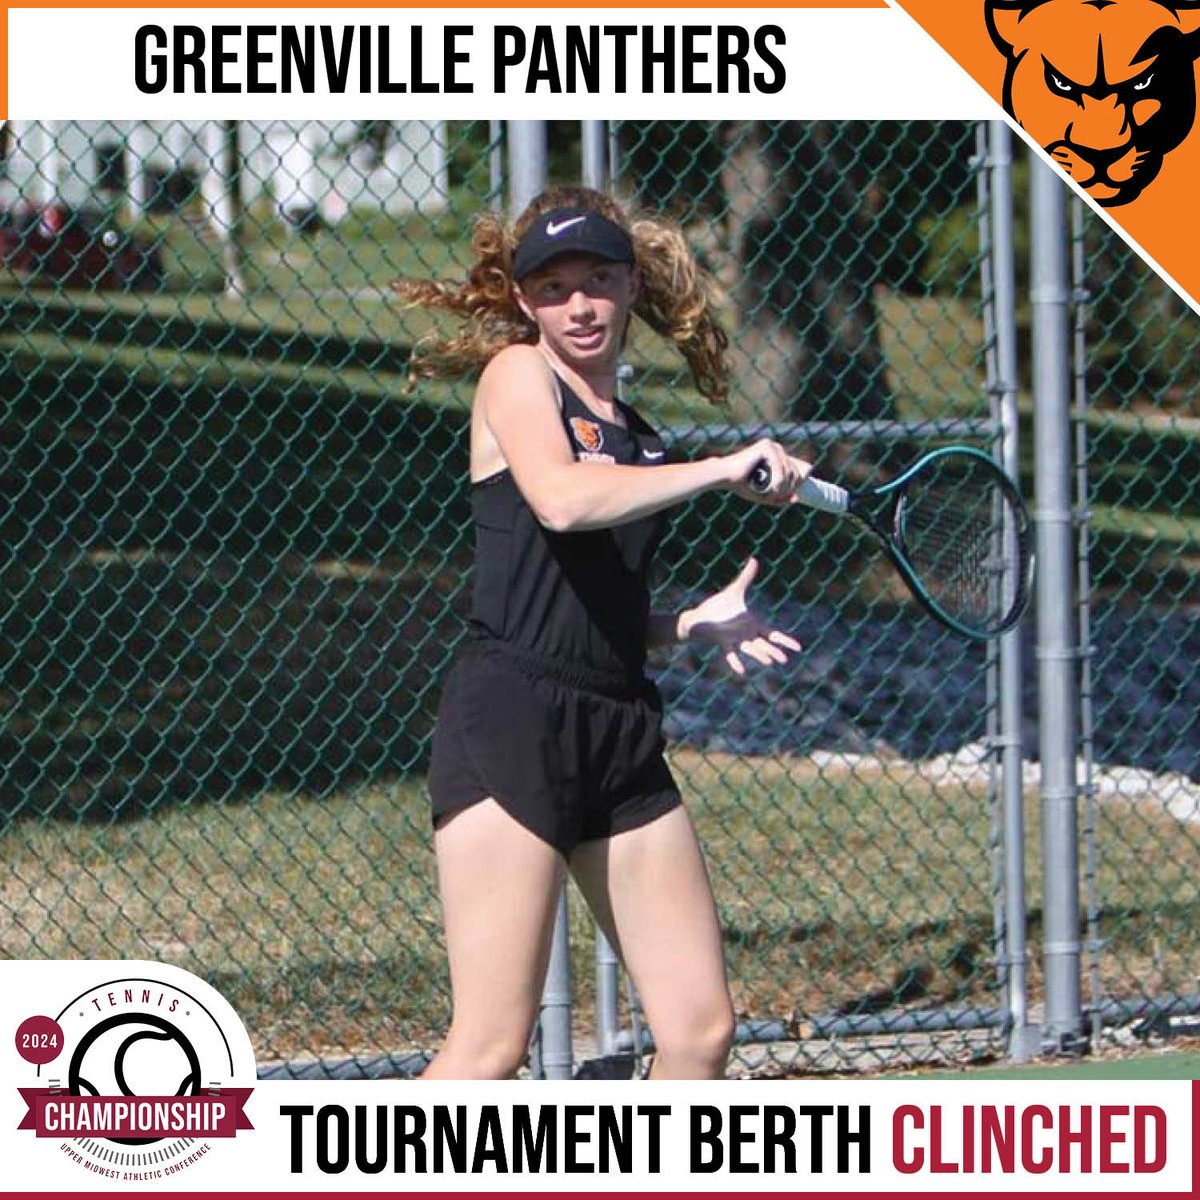 .@GUPanthers will compete as the No. 2 South Division seed in the UMAC Women’s Tennis Tournament this weekend! The Panthers are 11-8 this season and will be competing for their program’s first UMAC postseason title! #UMAC | #NCAAD3 | #WhyD3 | #d3tennis